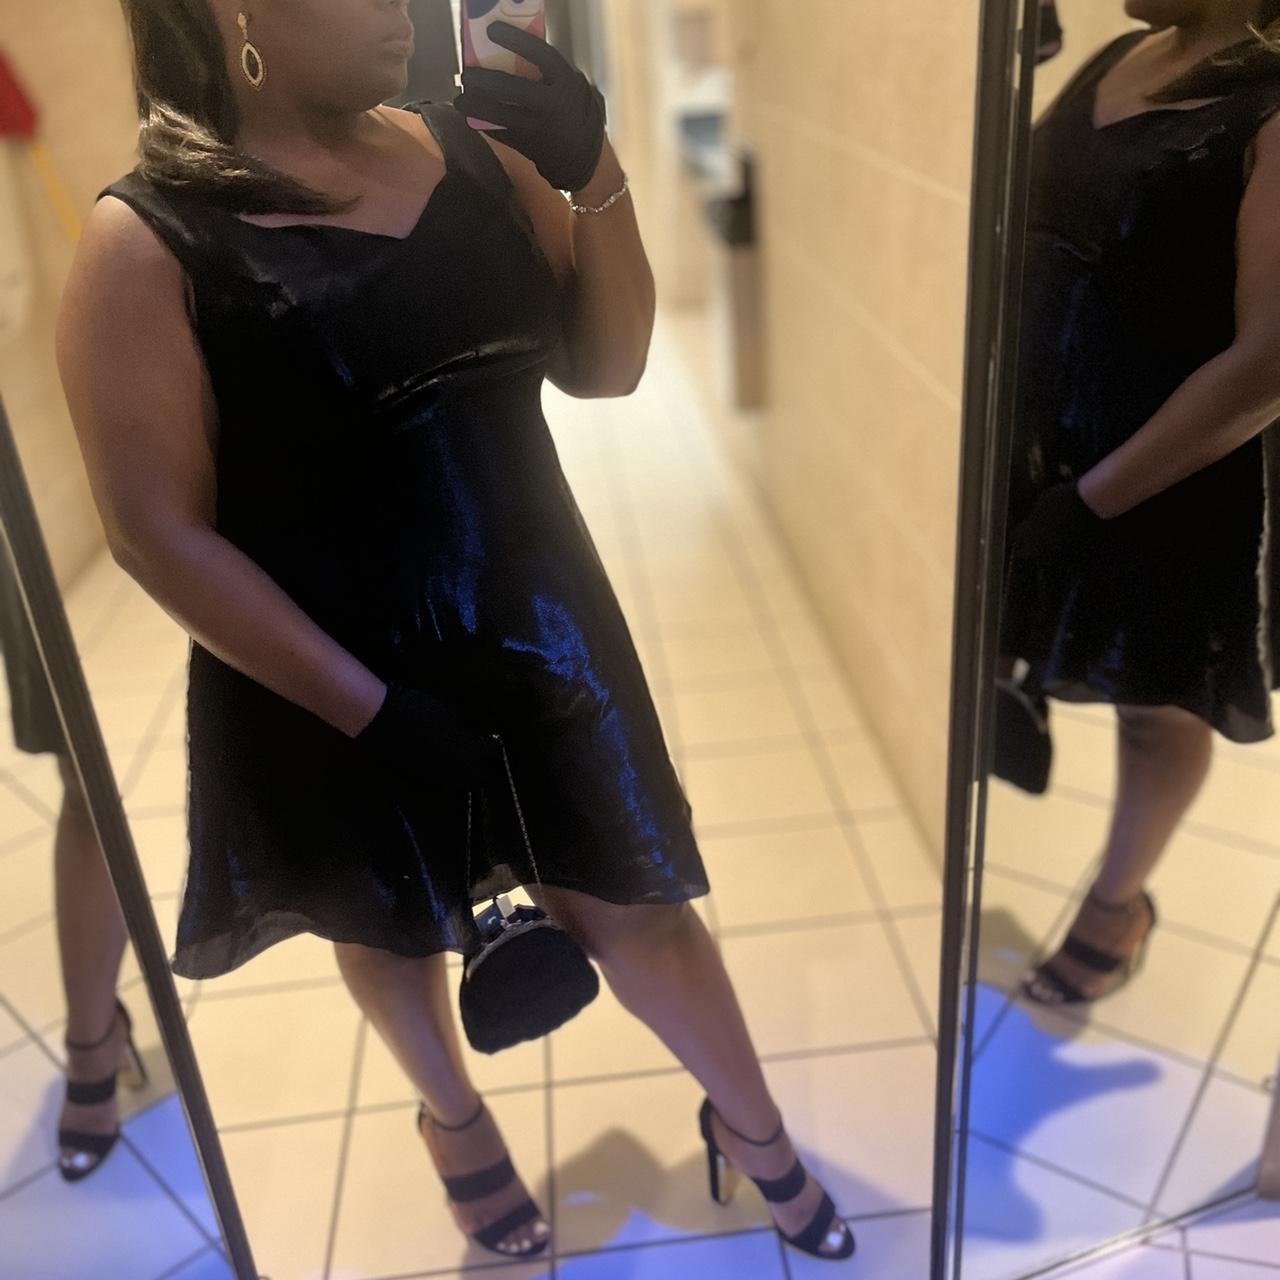 All Black Women's Black and Silver Dress (4)